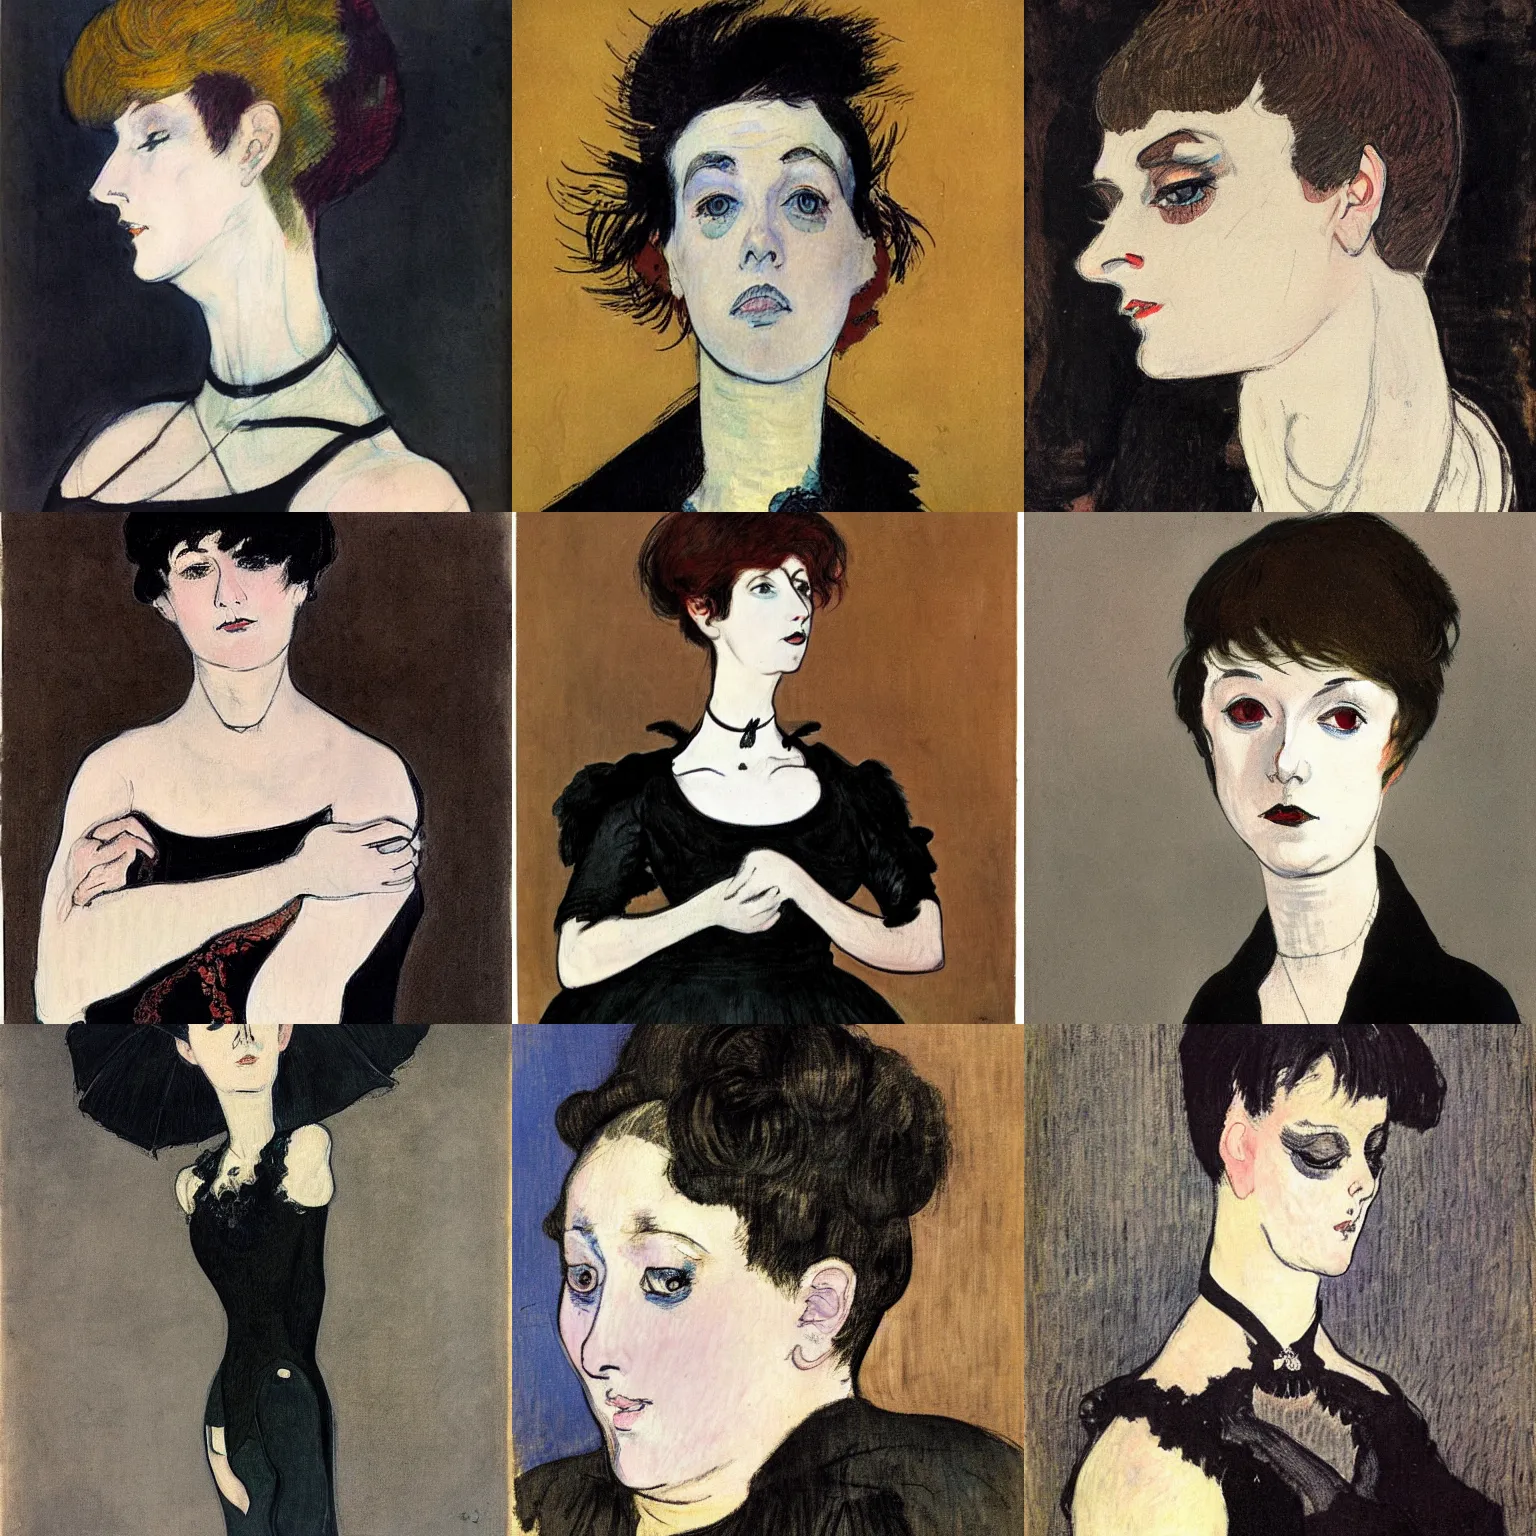 Prompt: A goth painted by Henri de Toulouse-Lautrec. Her hair is dark brown and cut into a short, messy pixie cut. She has a slightly rounded face, with a pointed chin, large entirely-black eyes, and a small nose. She is wearing a black tank top, a black leather jacket, a black knee-length skirt, a black choker, and black leather boots.